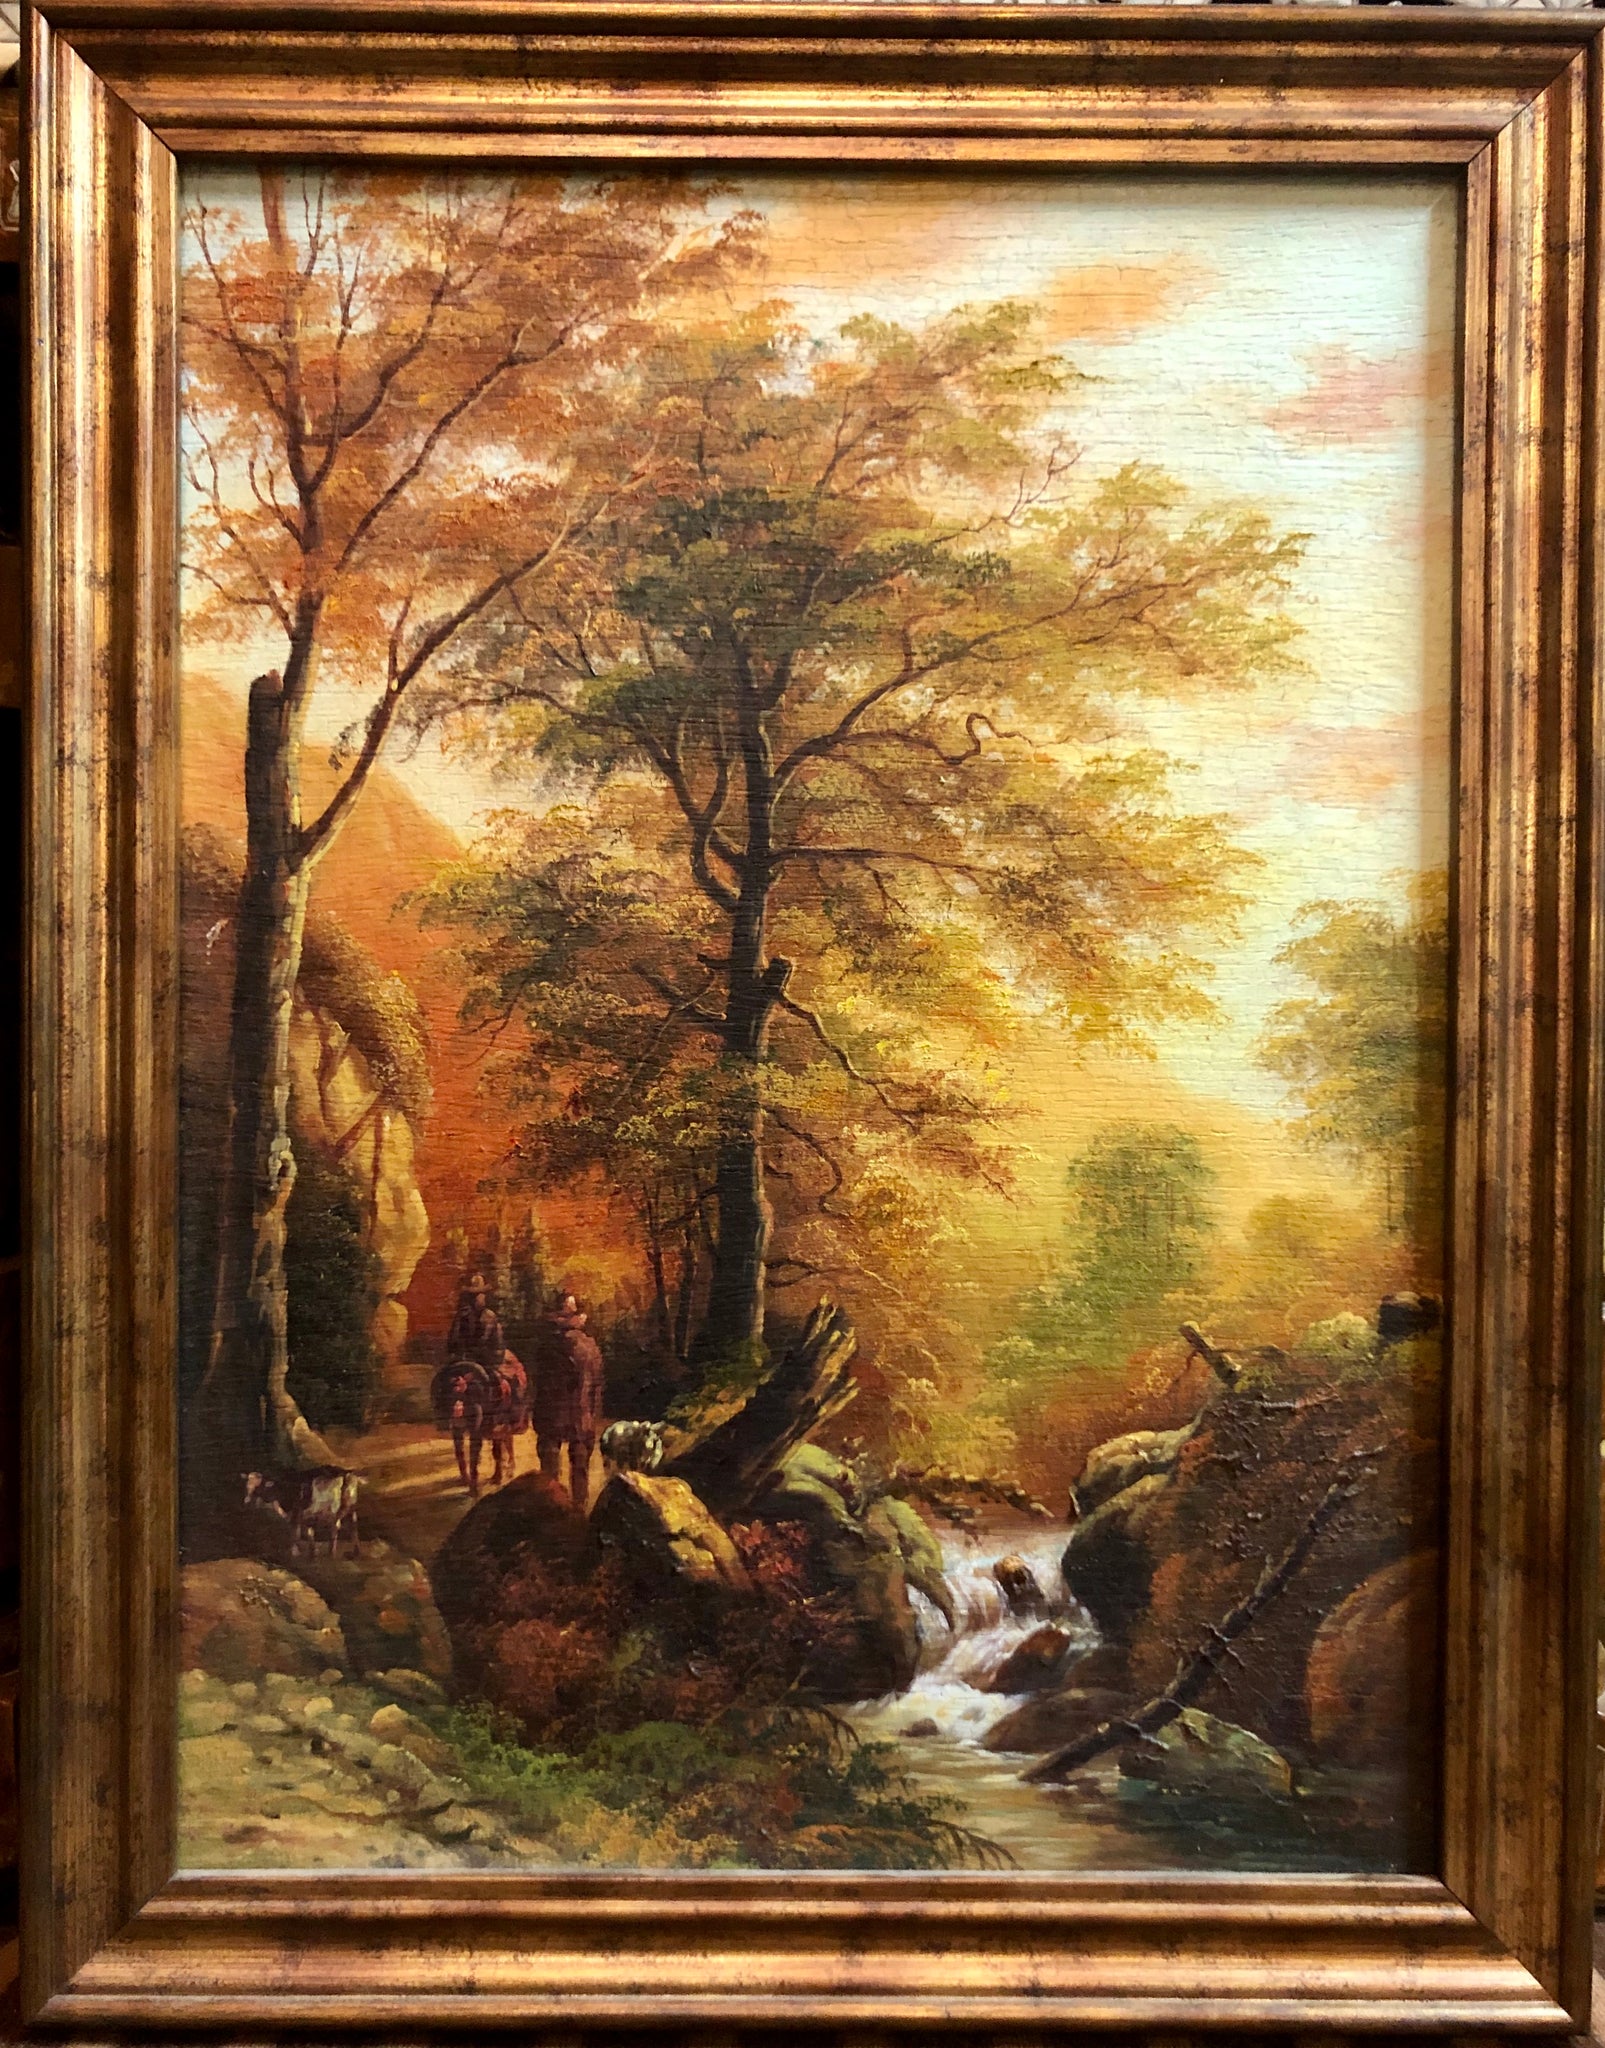 A Shepherd on a horseback with a walking man deep into the woods, handmade Oil Painting.